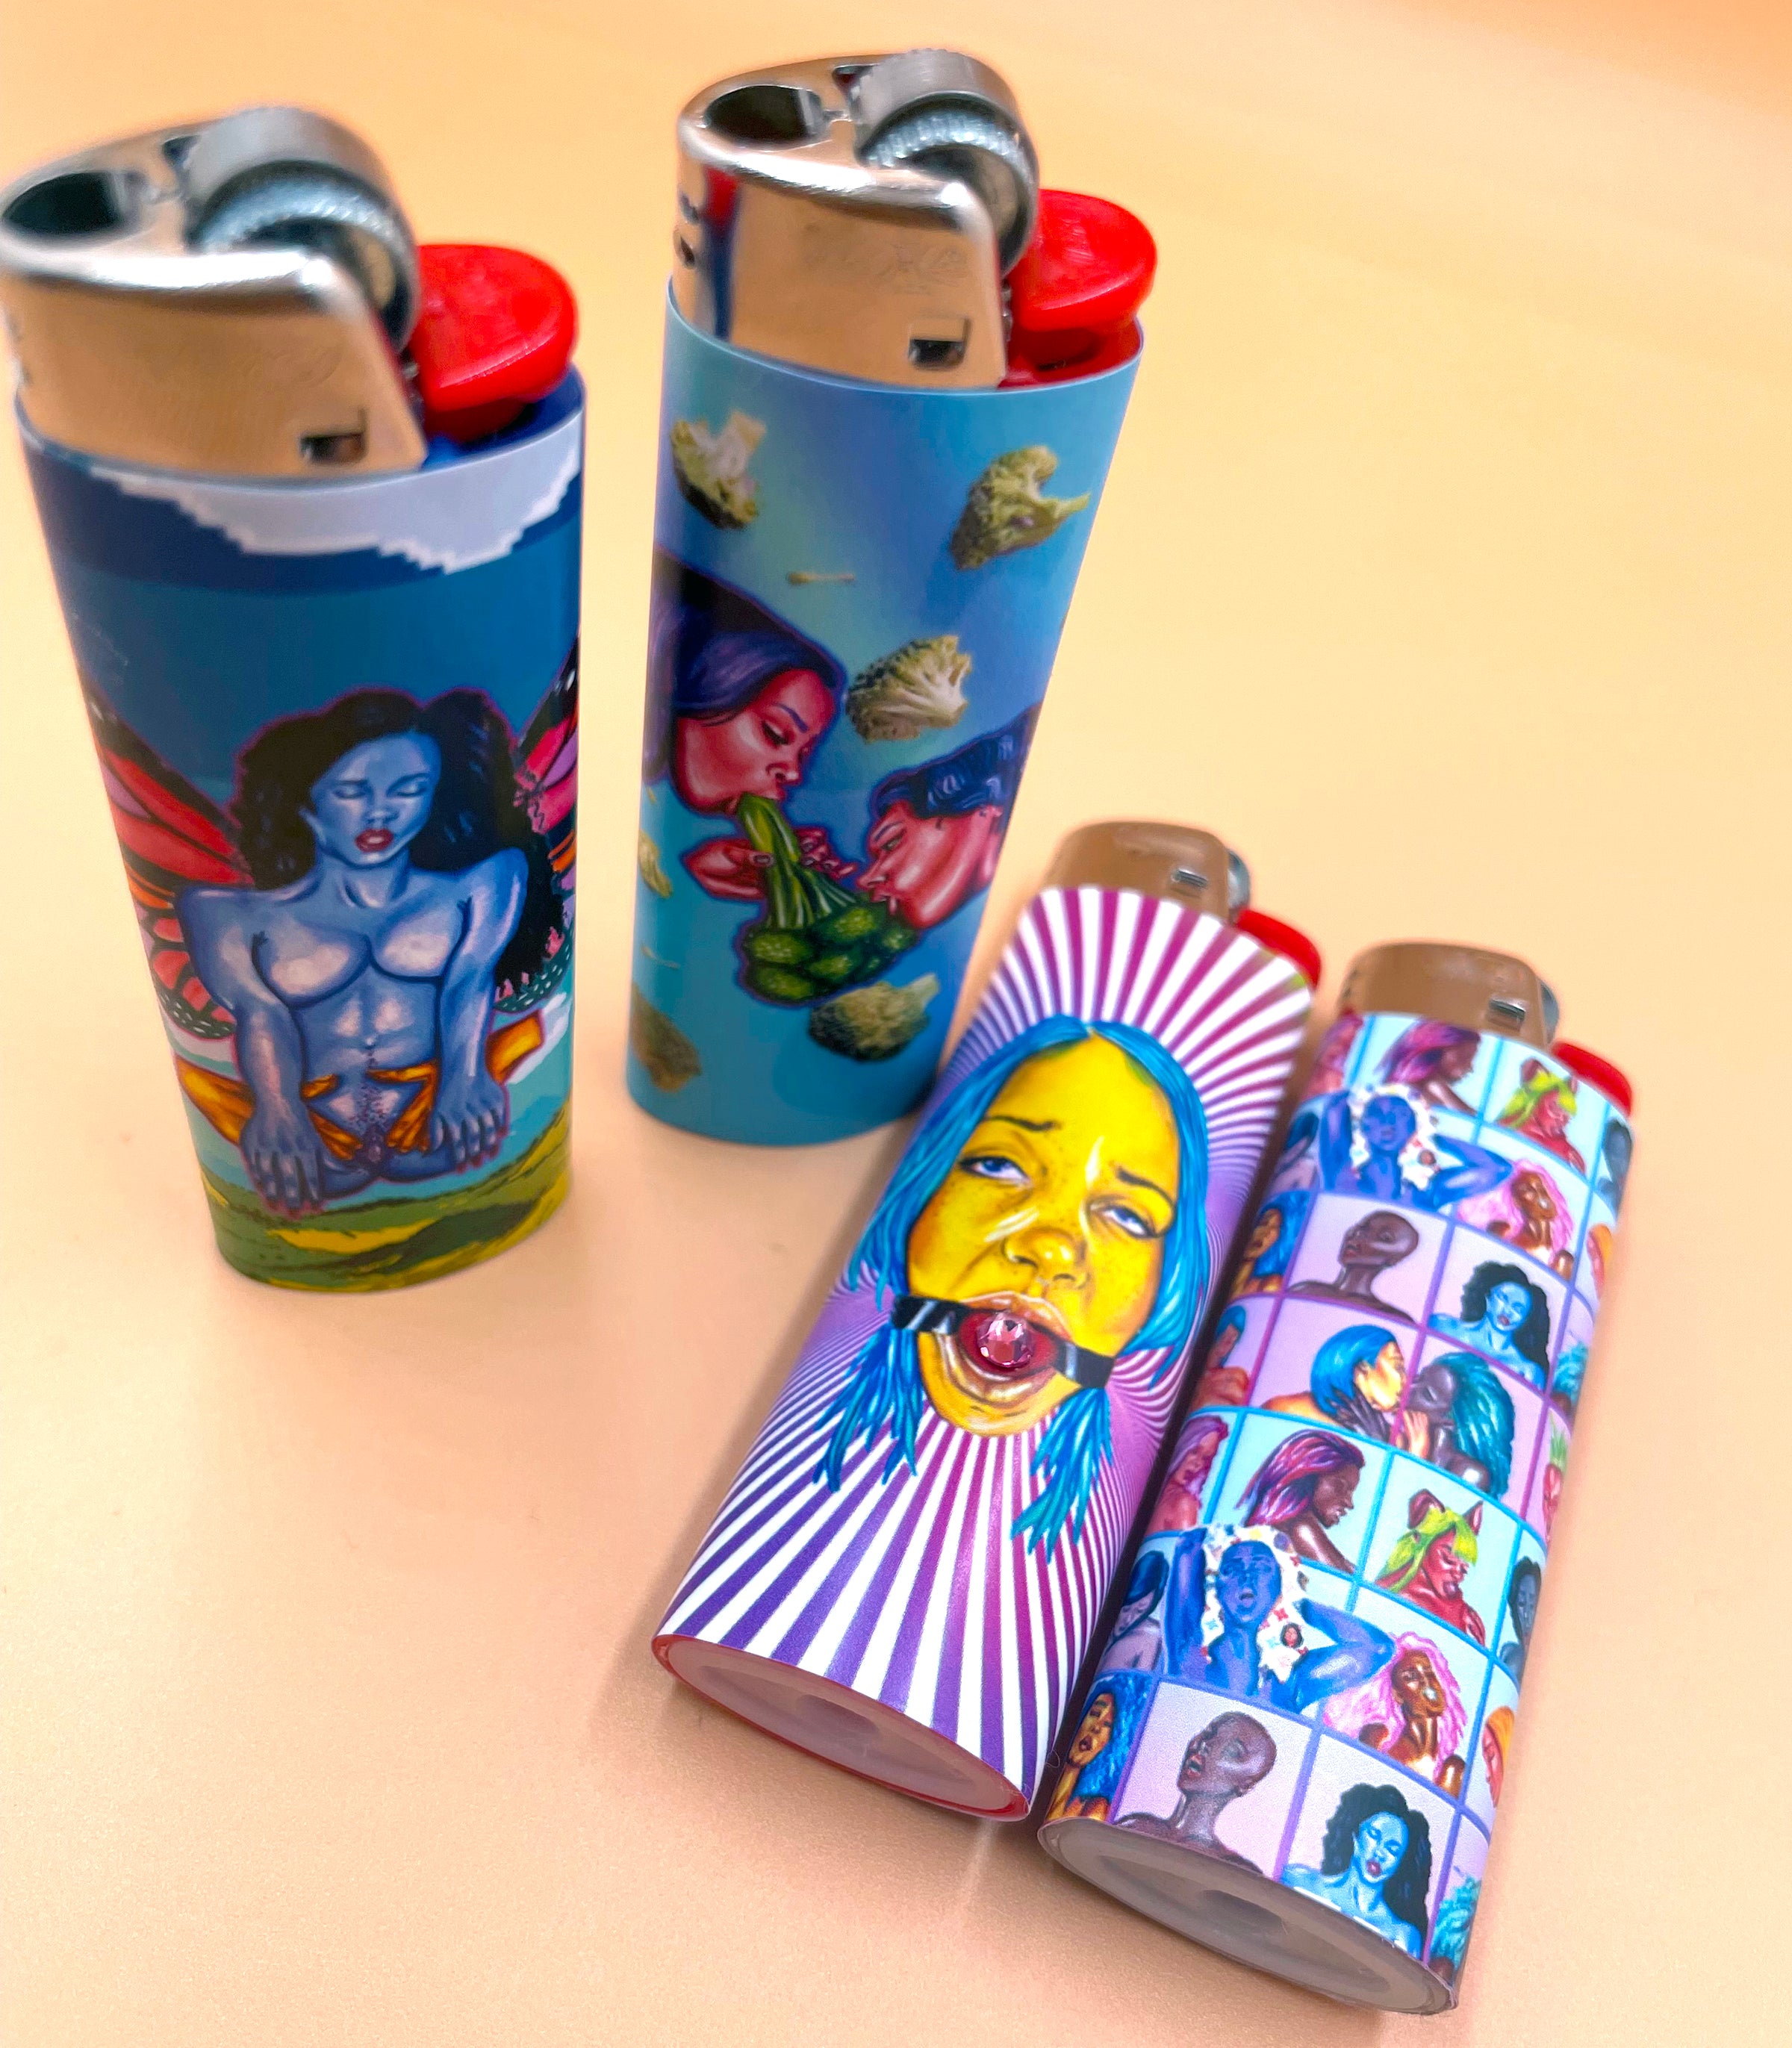 Open to You -Set of 4 Art Lighters